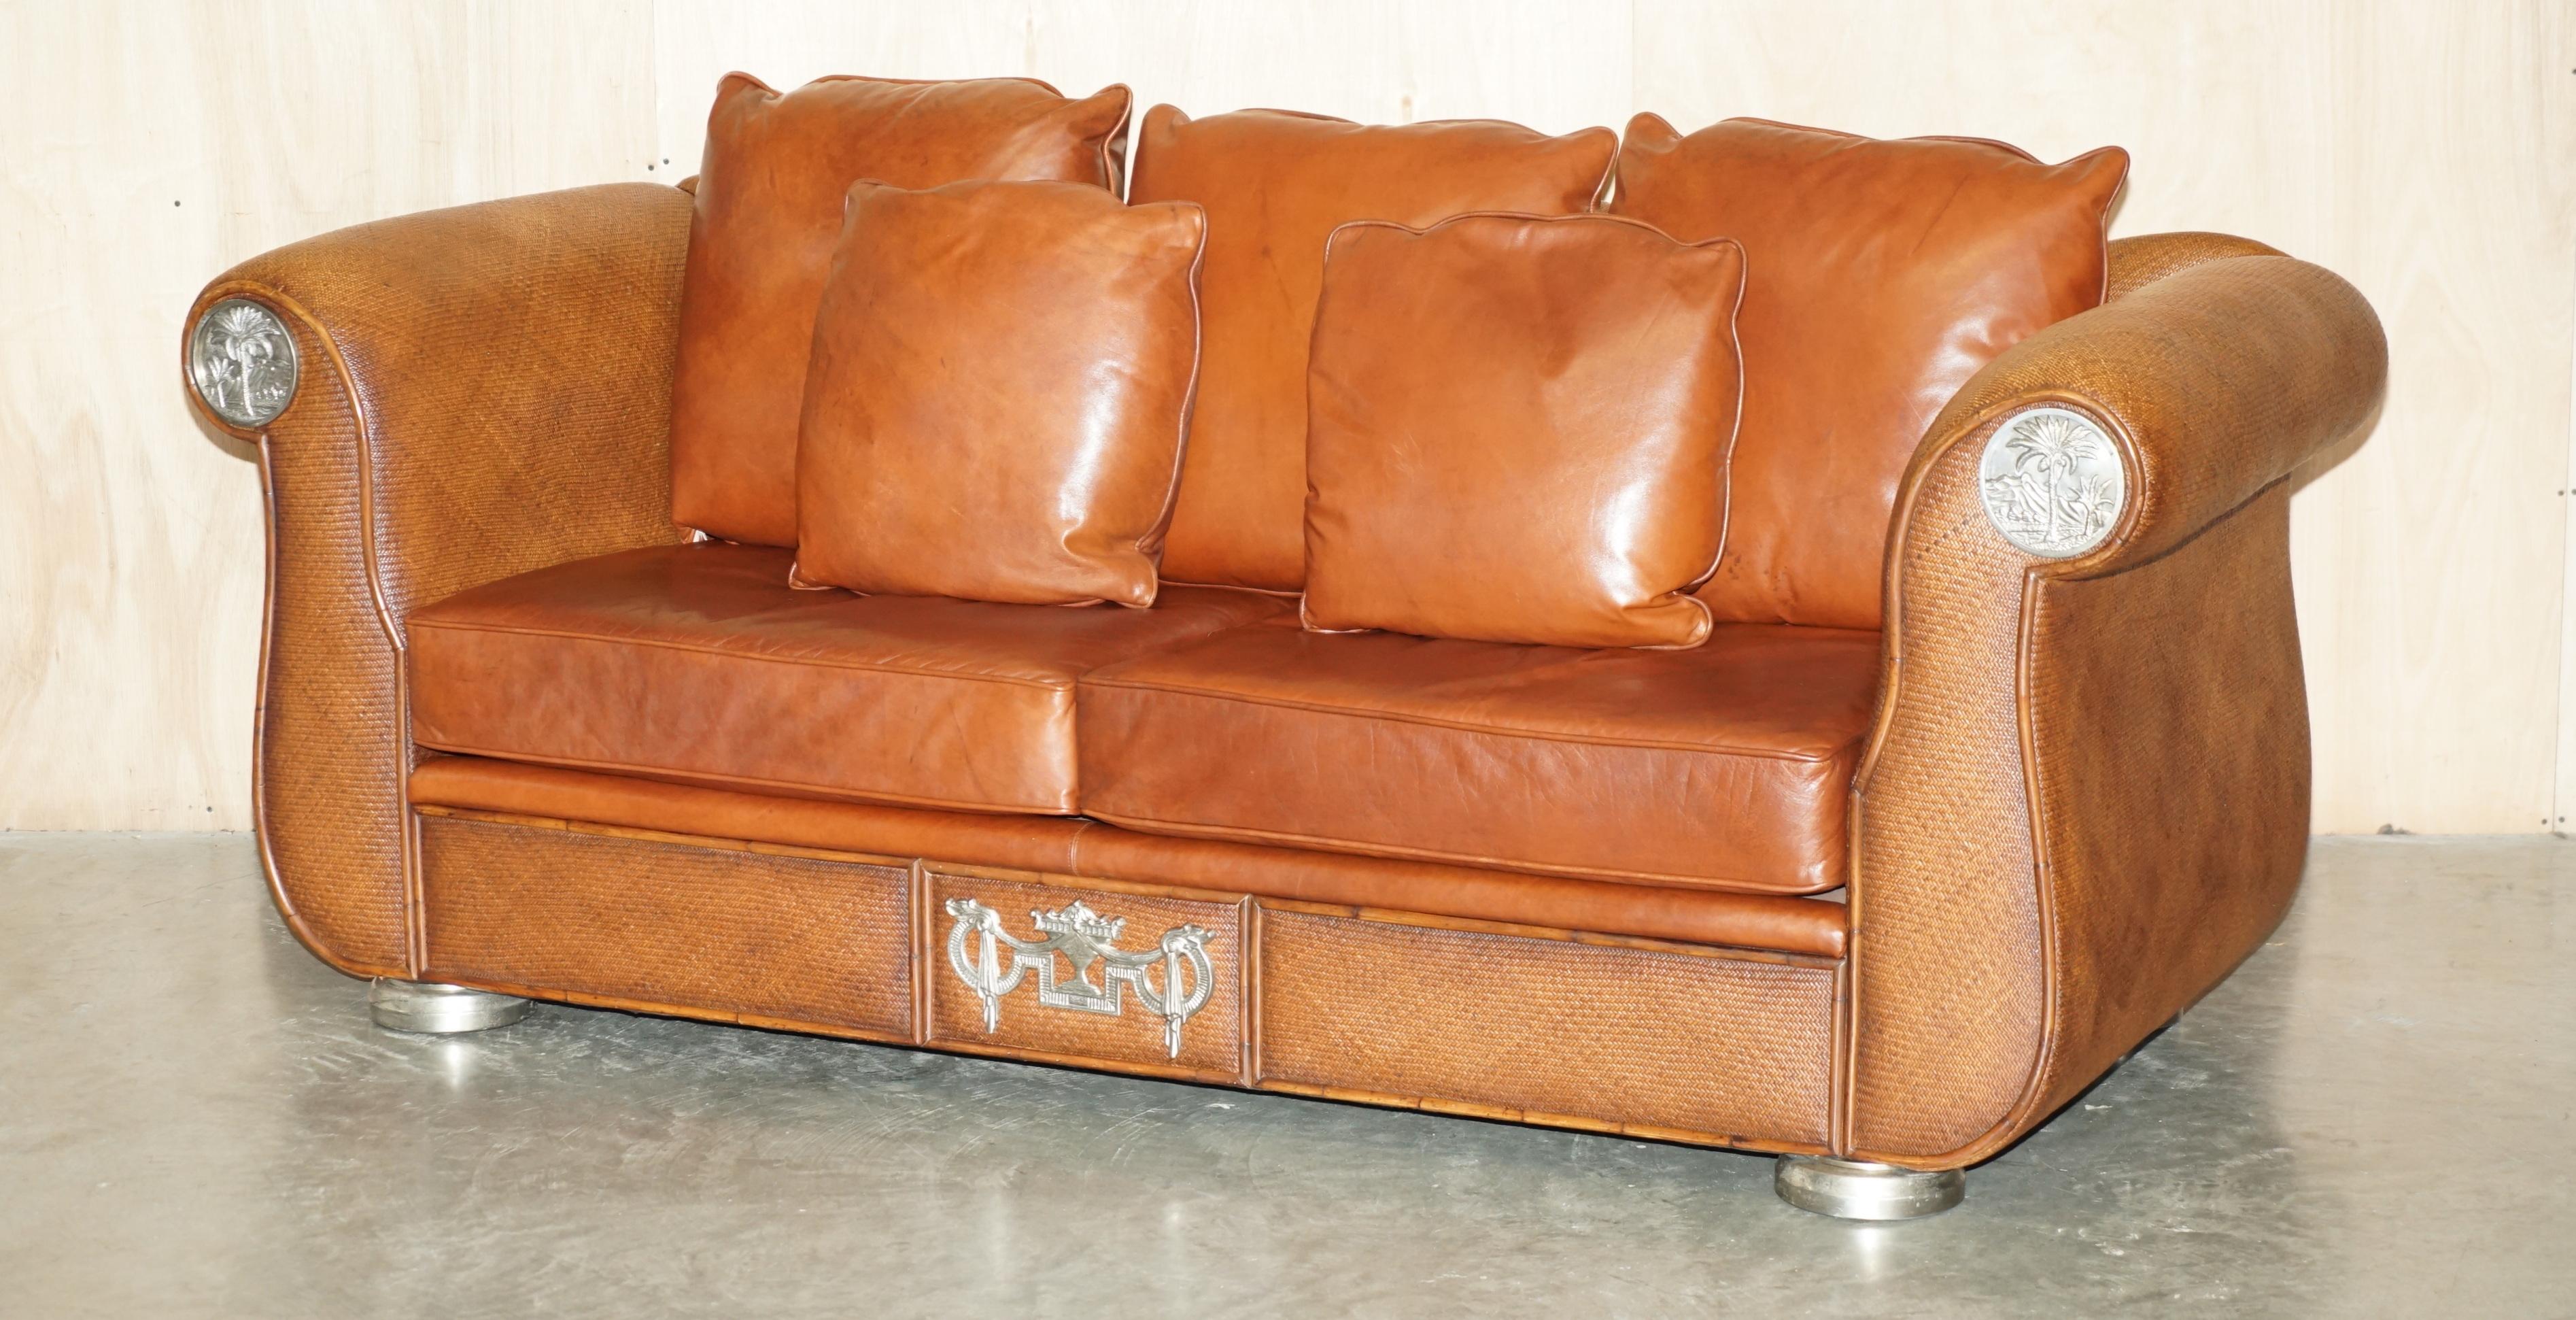 Royal House Antiques is delighted to offer for sale this exquisite pair of Thomasville Safari Collection large three seat sofas with brown leather cushions and woven frames which are part of a large suite 

I have a rather lovely suite of this